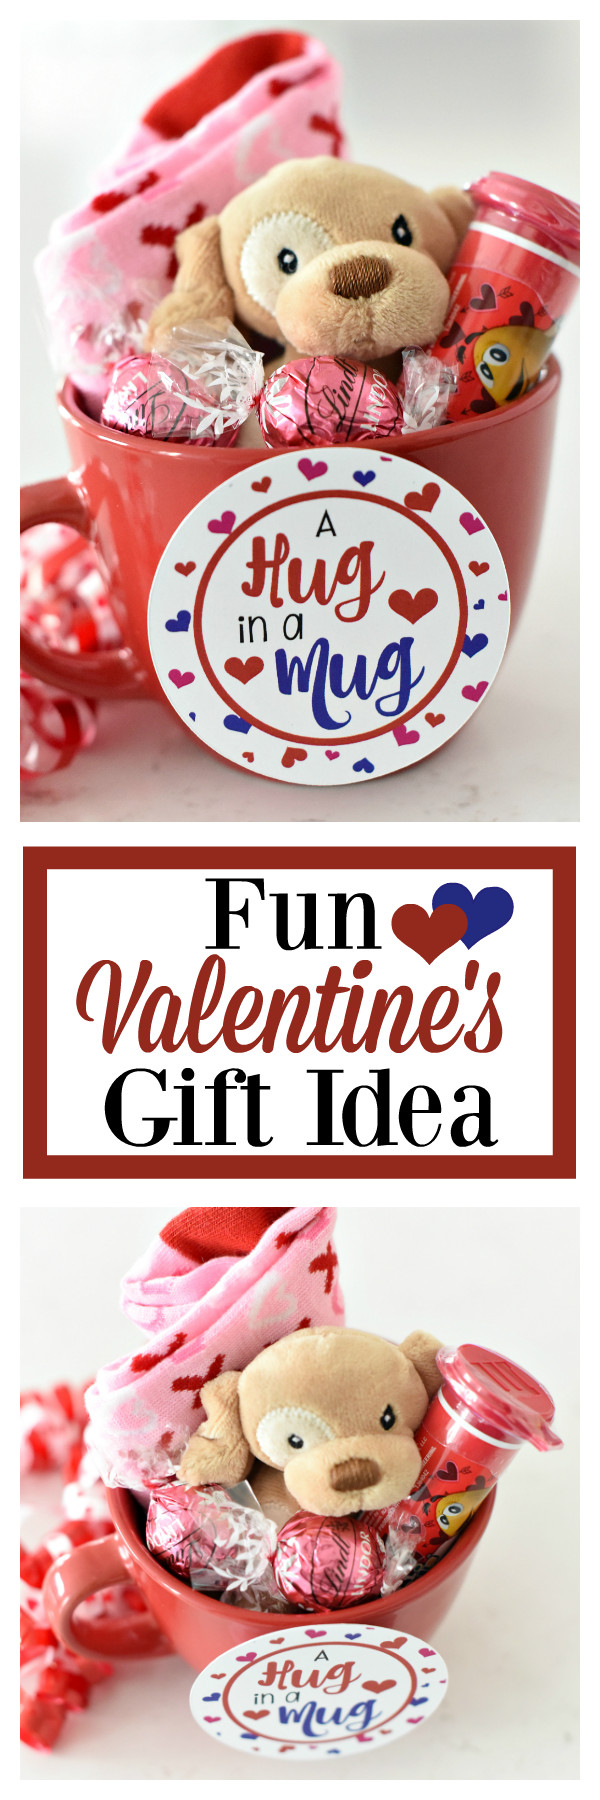 Funny Valentines Day Gift Ideas
 Fun Valentines Gift Idea for Kids – Fun Squared